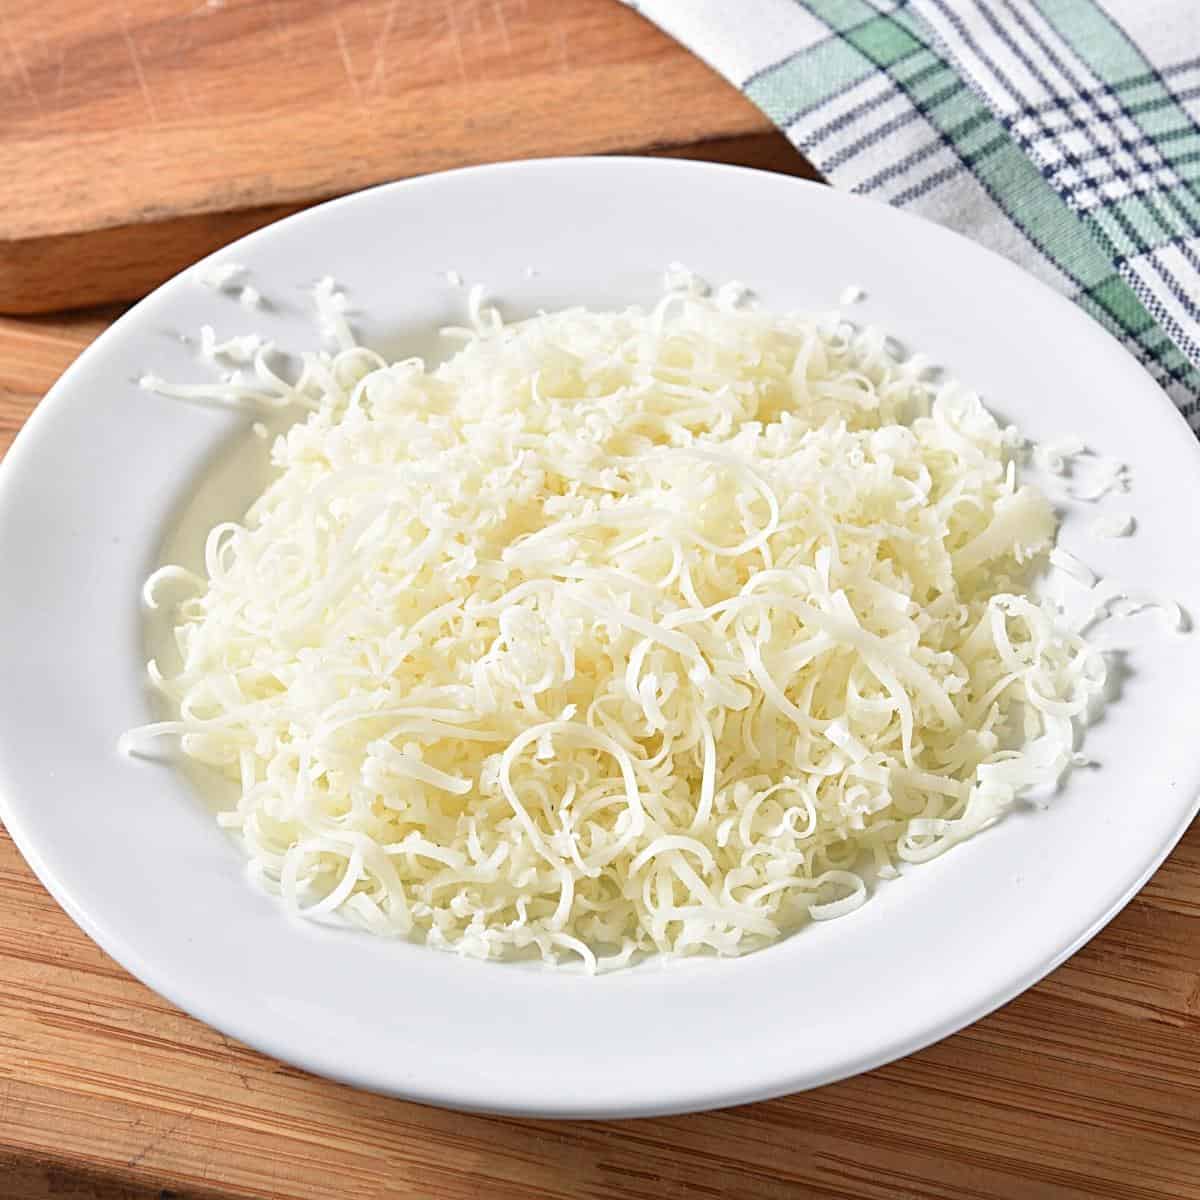 A bowl with shredded cheese.